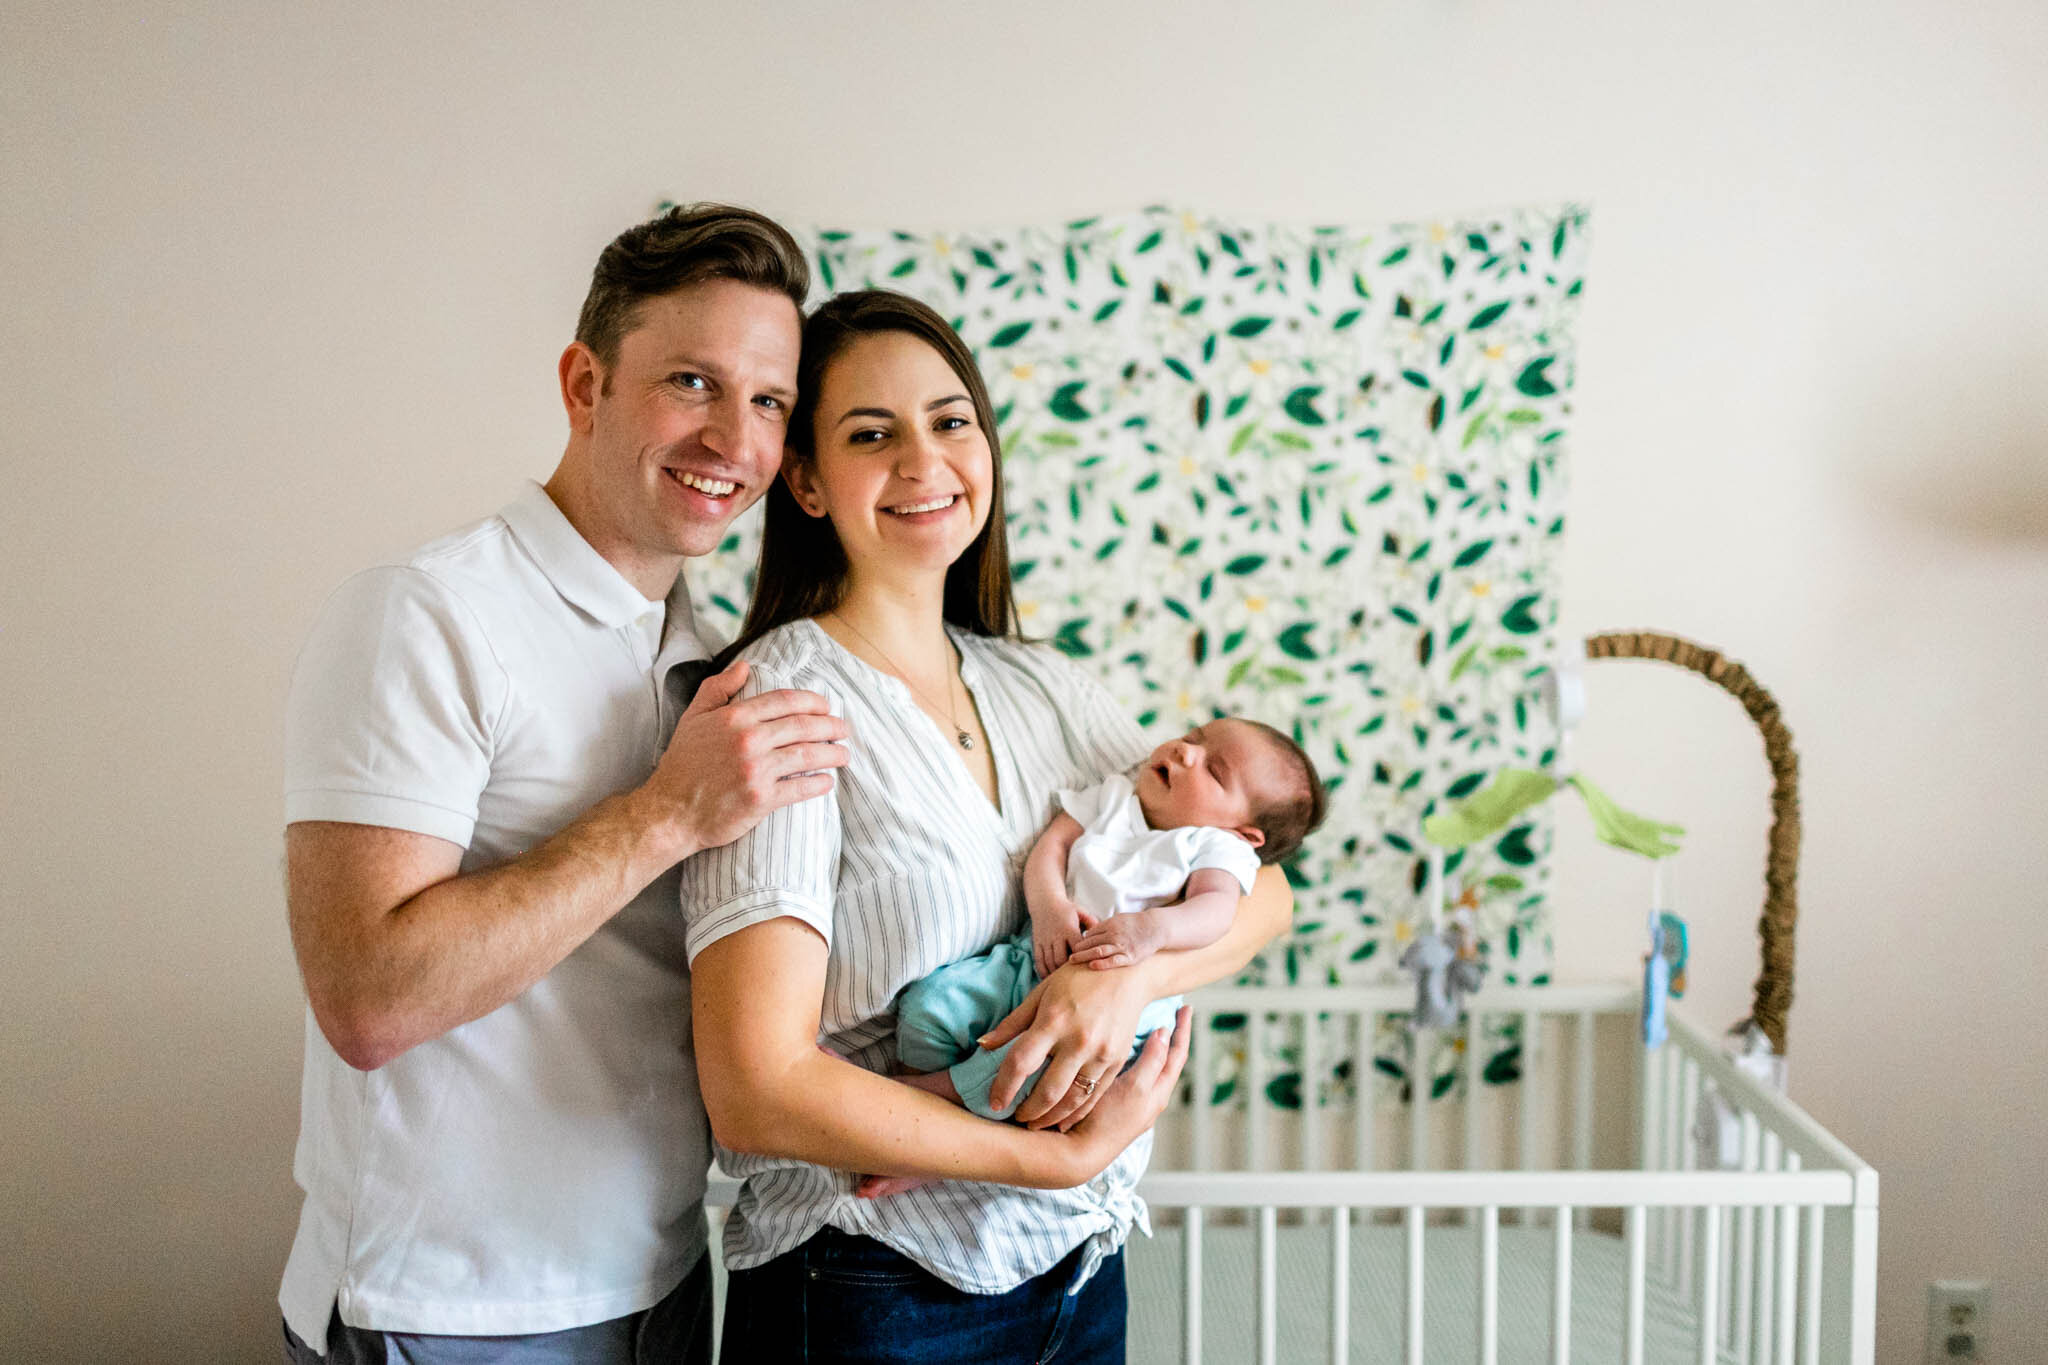 Raleigh Newborn Photographer | By G. Lin Photography | Family looking at camera and smiling while holding baby